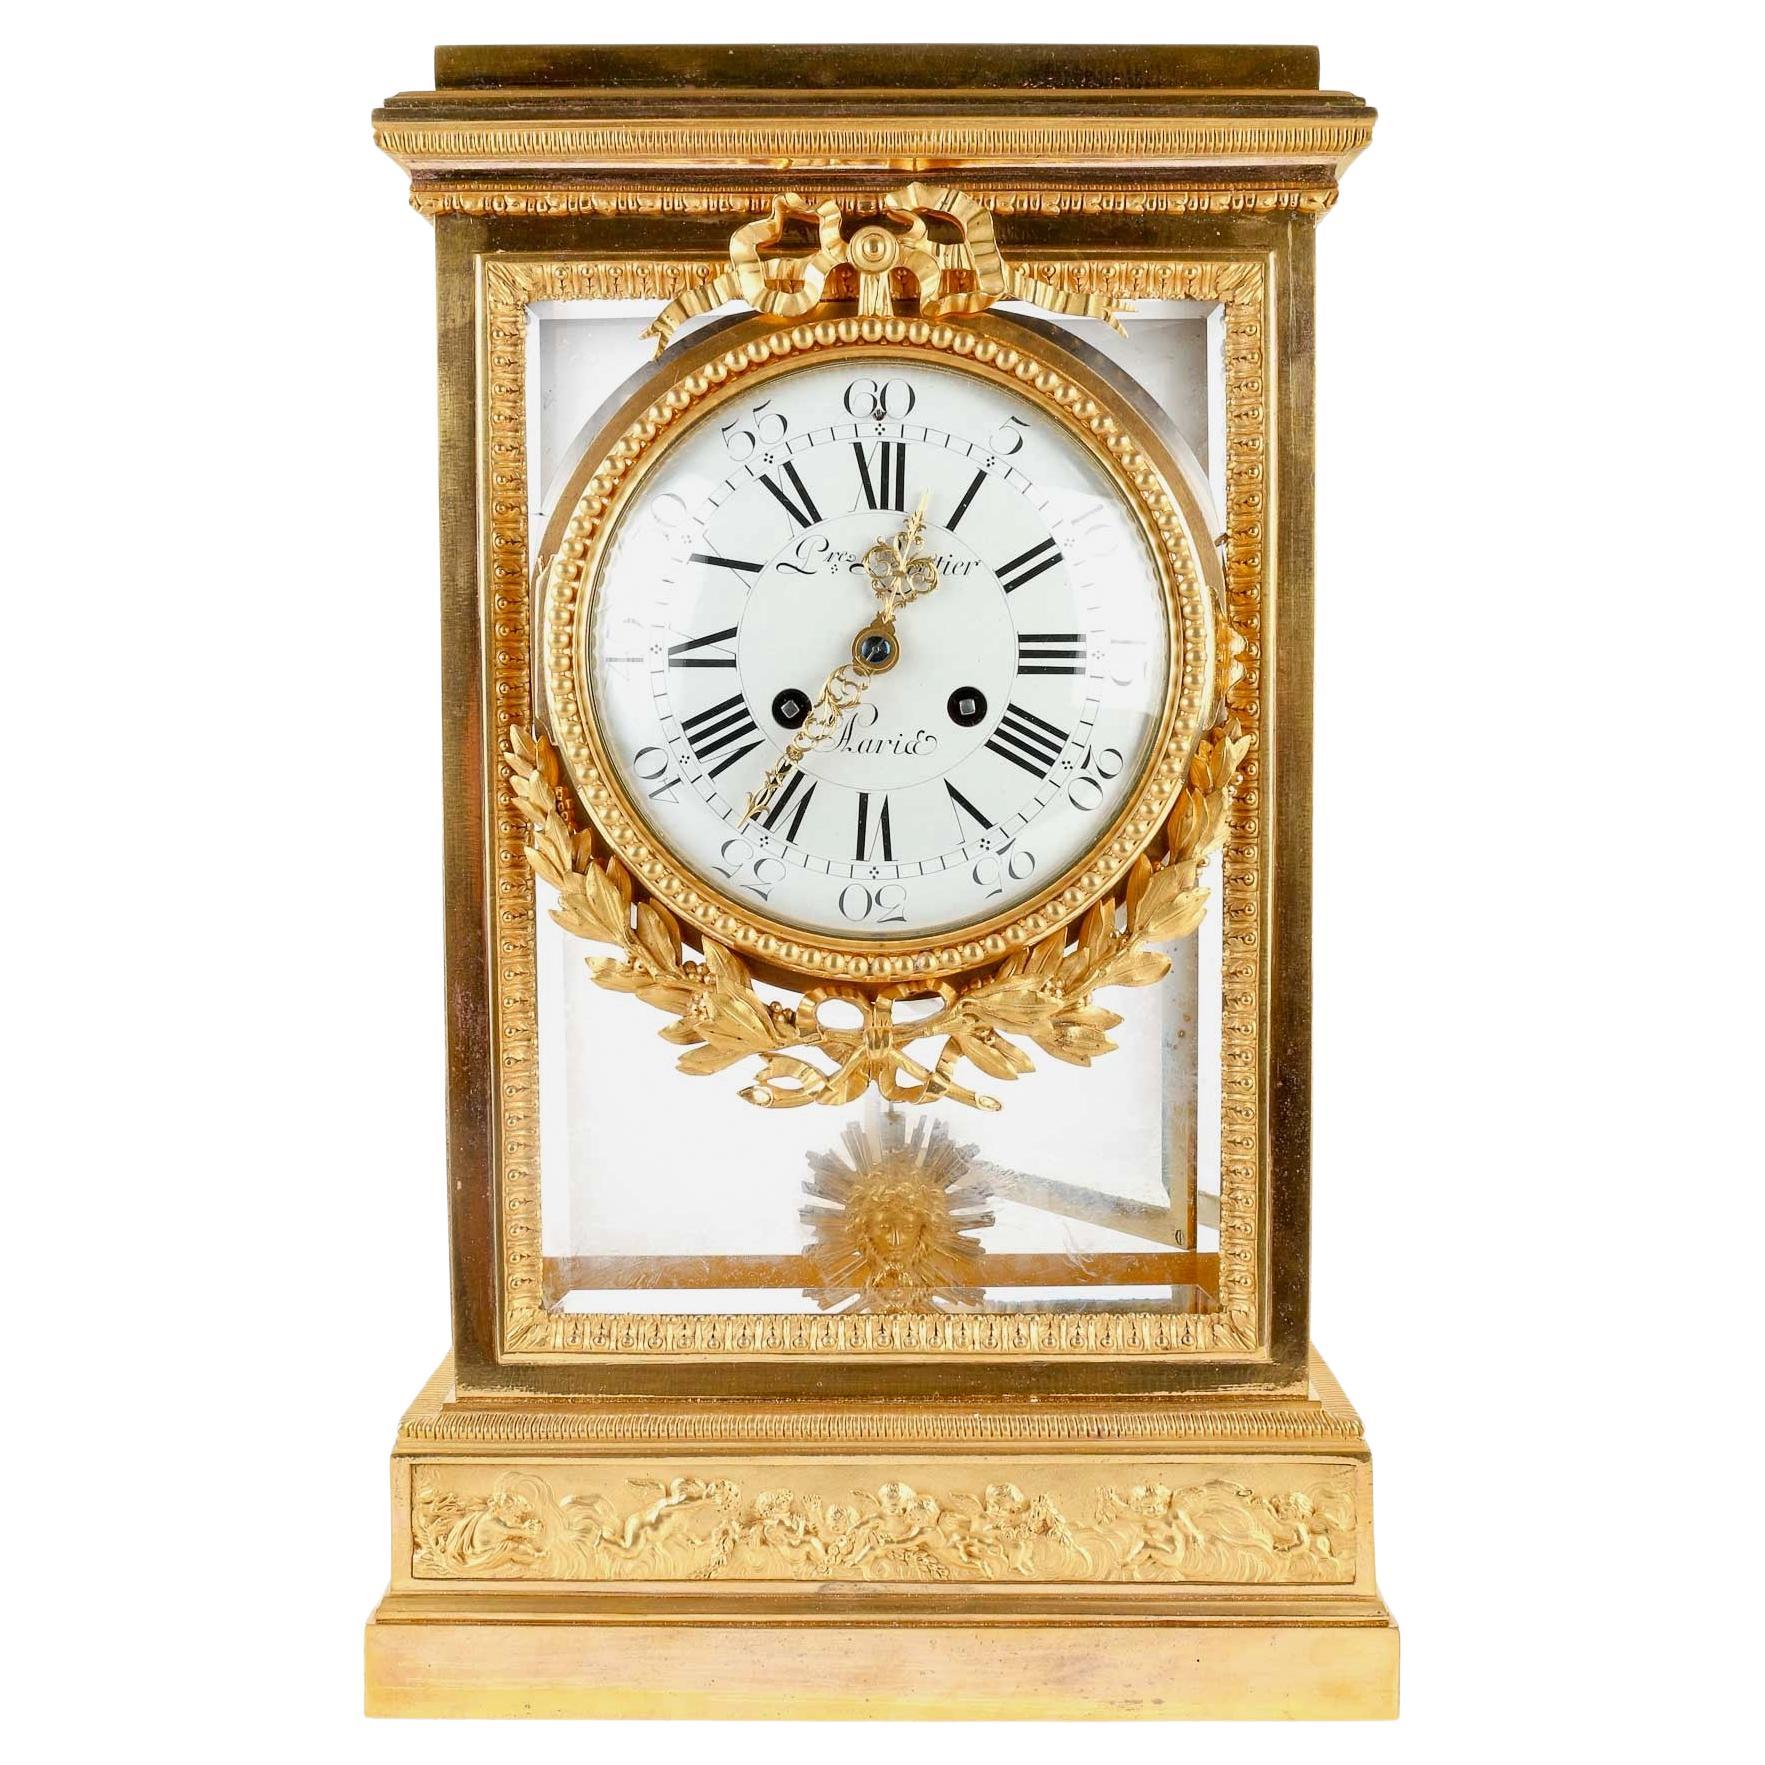 A 19th Century Neoclassical Style Régulateur de Cheminée 

Ormolu Mantel Regulator 
Very finely chiseled designed with ribbons and laurels crown, a cherub frieze on the plinth 
Bevelled Glass on Each Face
Enameled Dial signed Pierre Leurtier